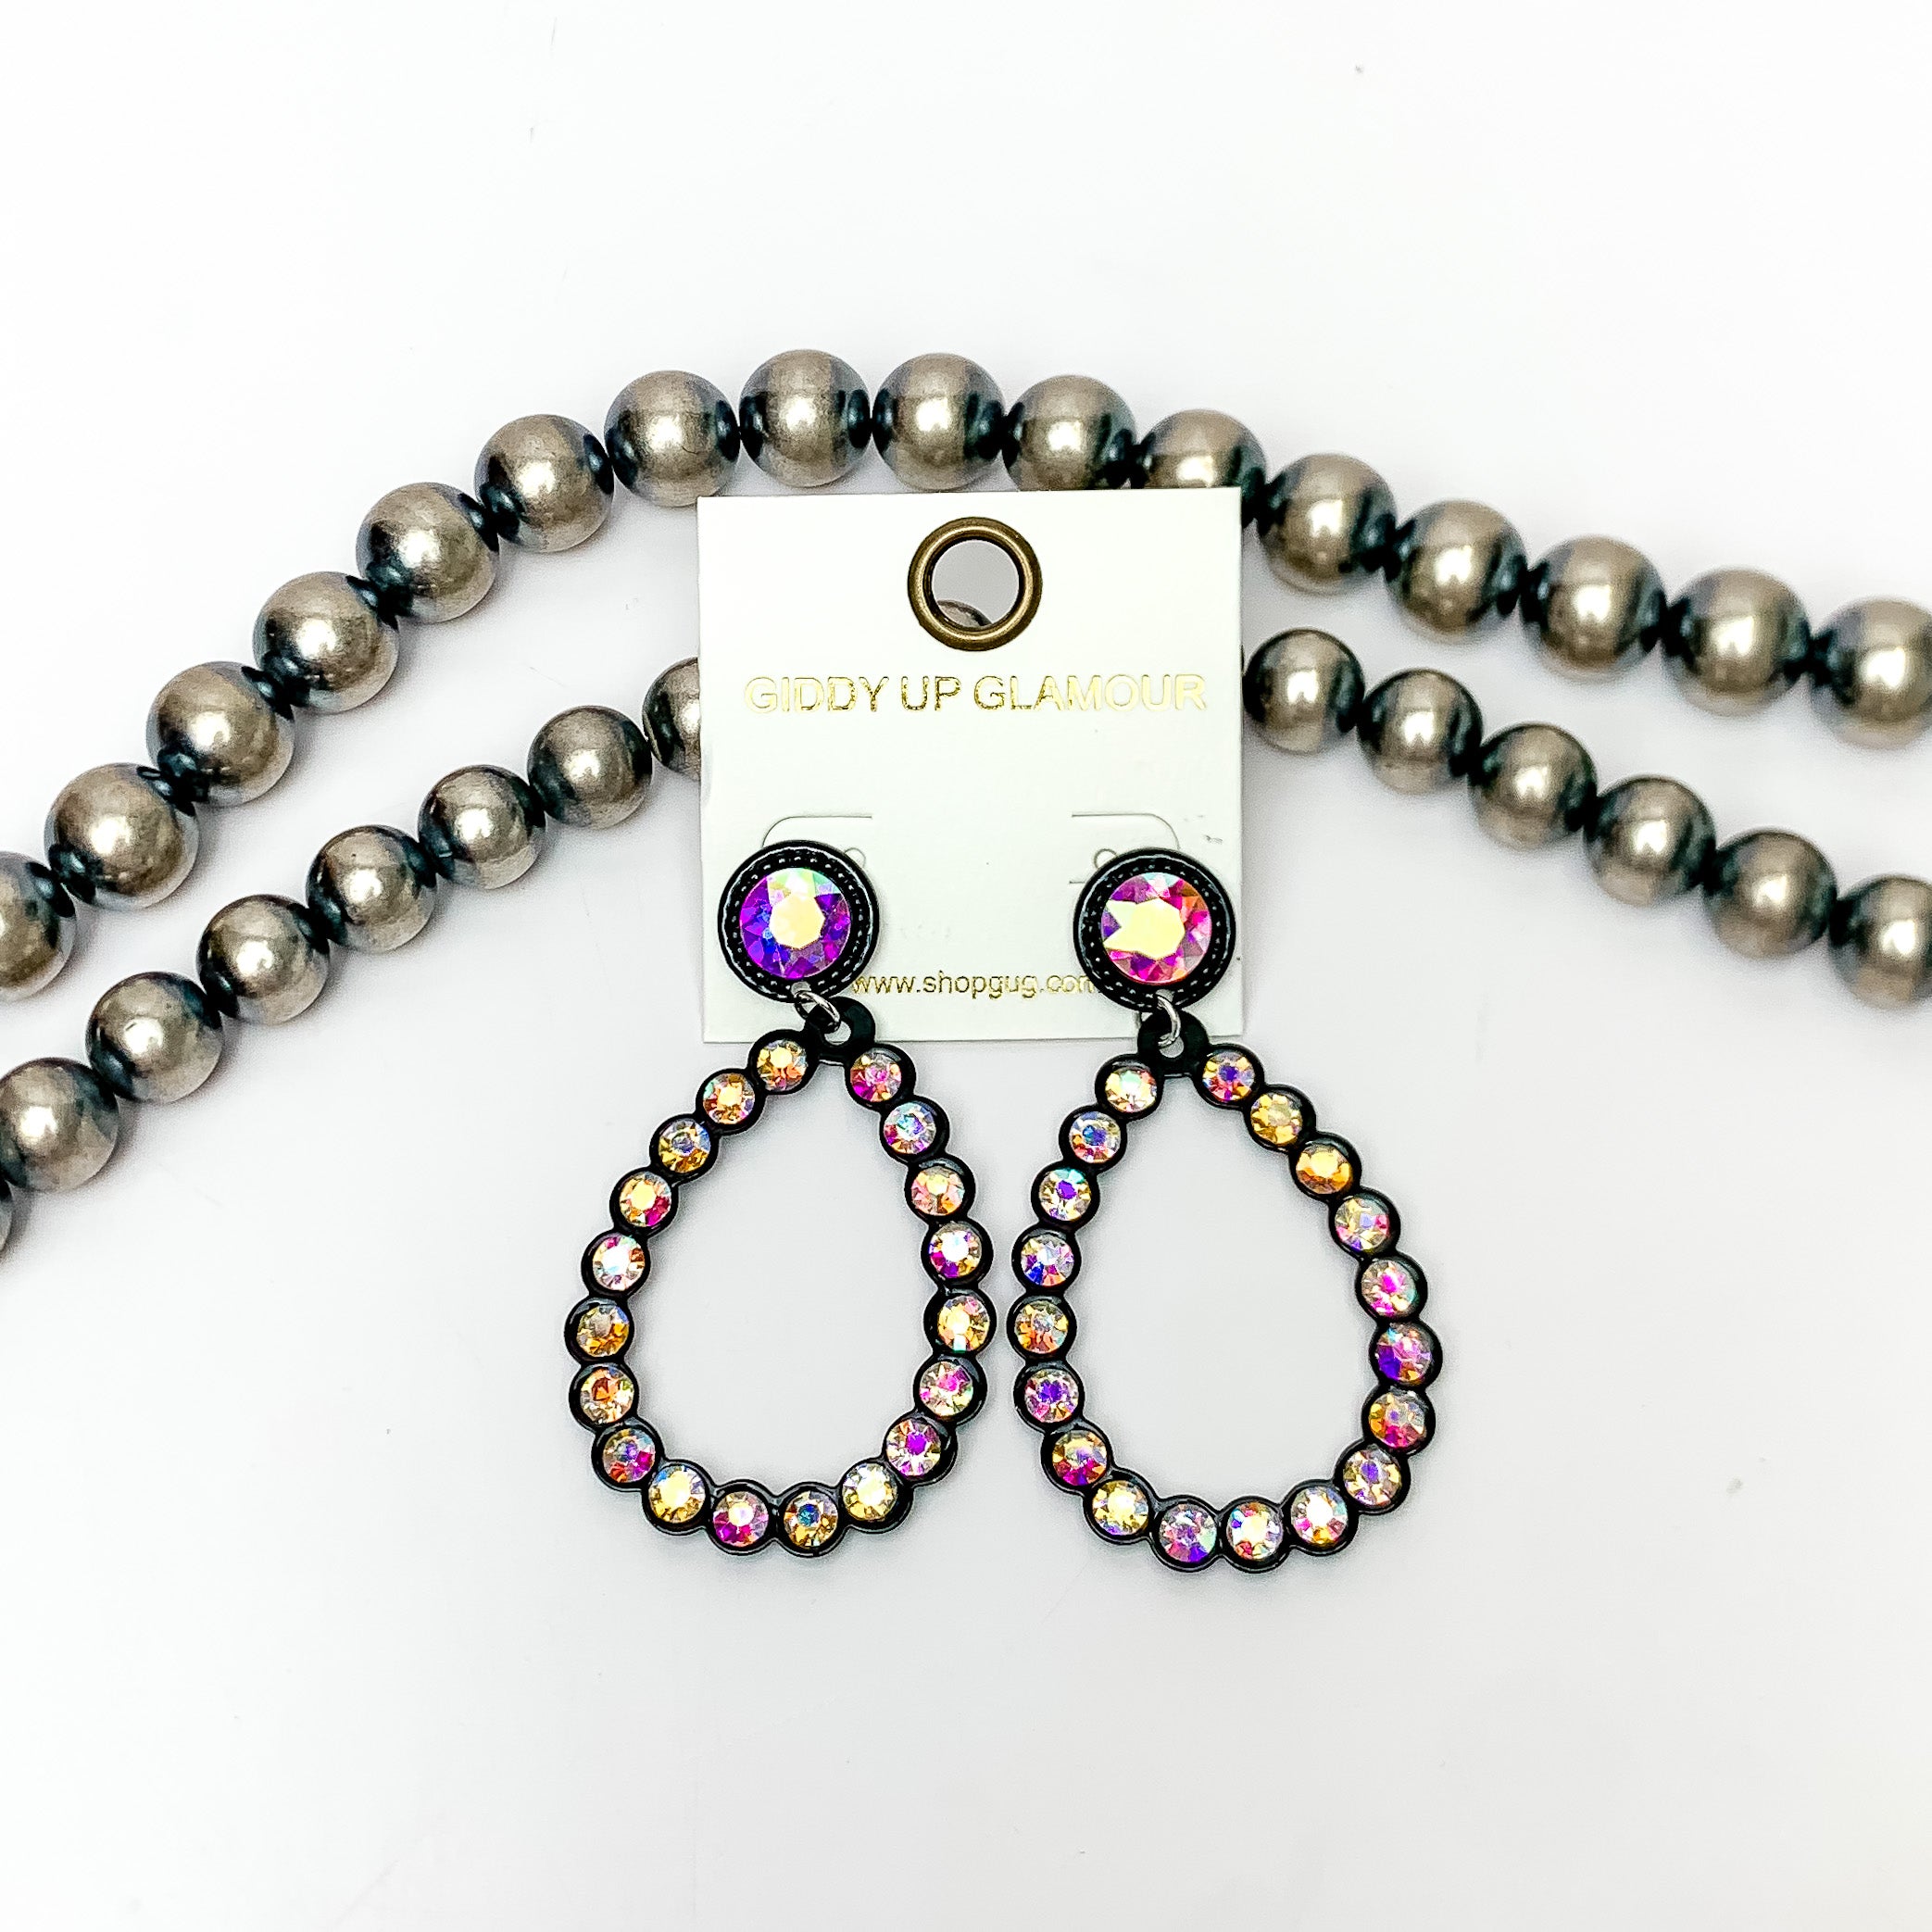 Glitzy Girl AB Crystal Teardrop Earrings in Black. Pictured on a white background with Navajo pearls behind the earrings.